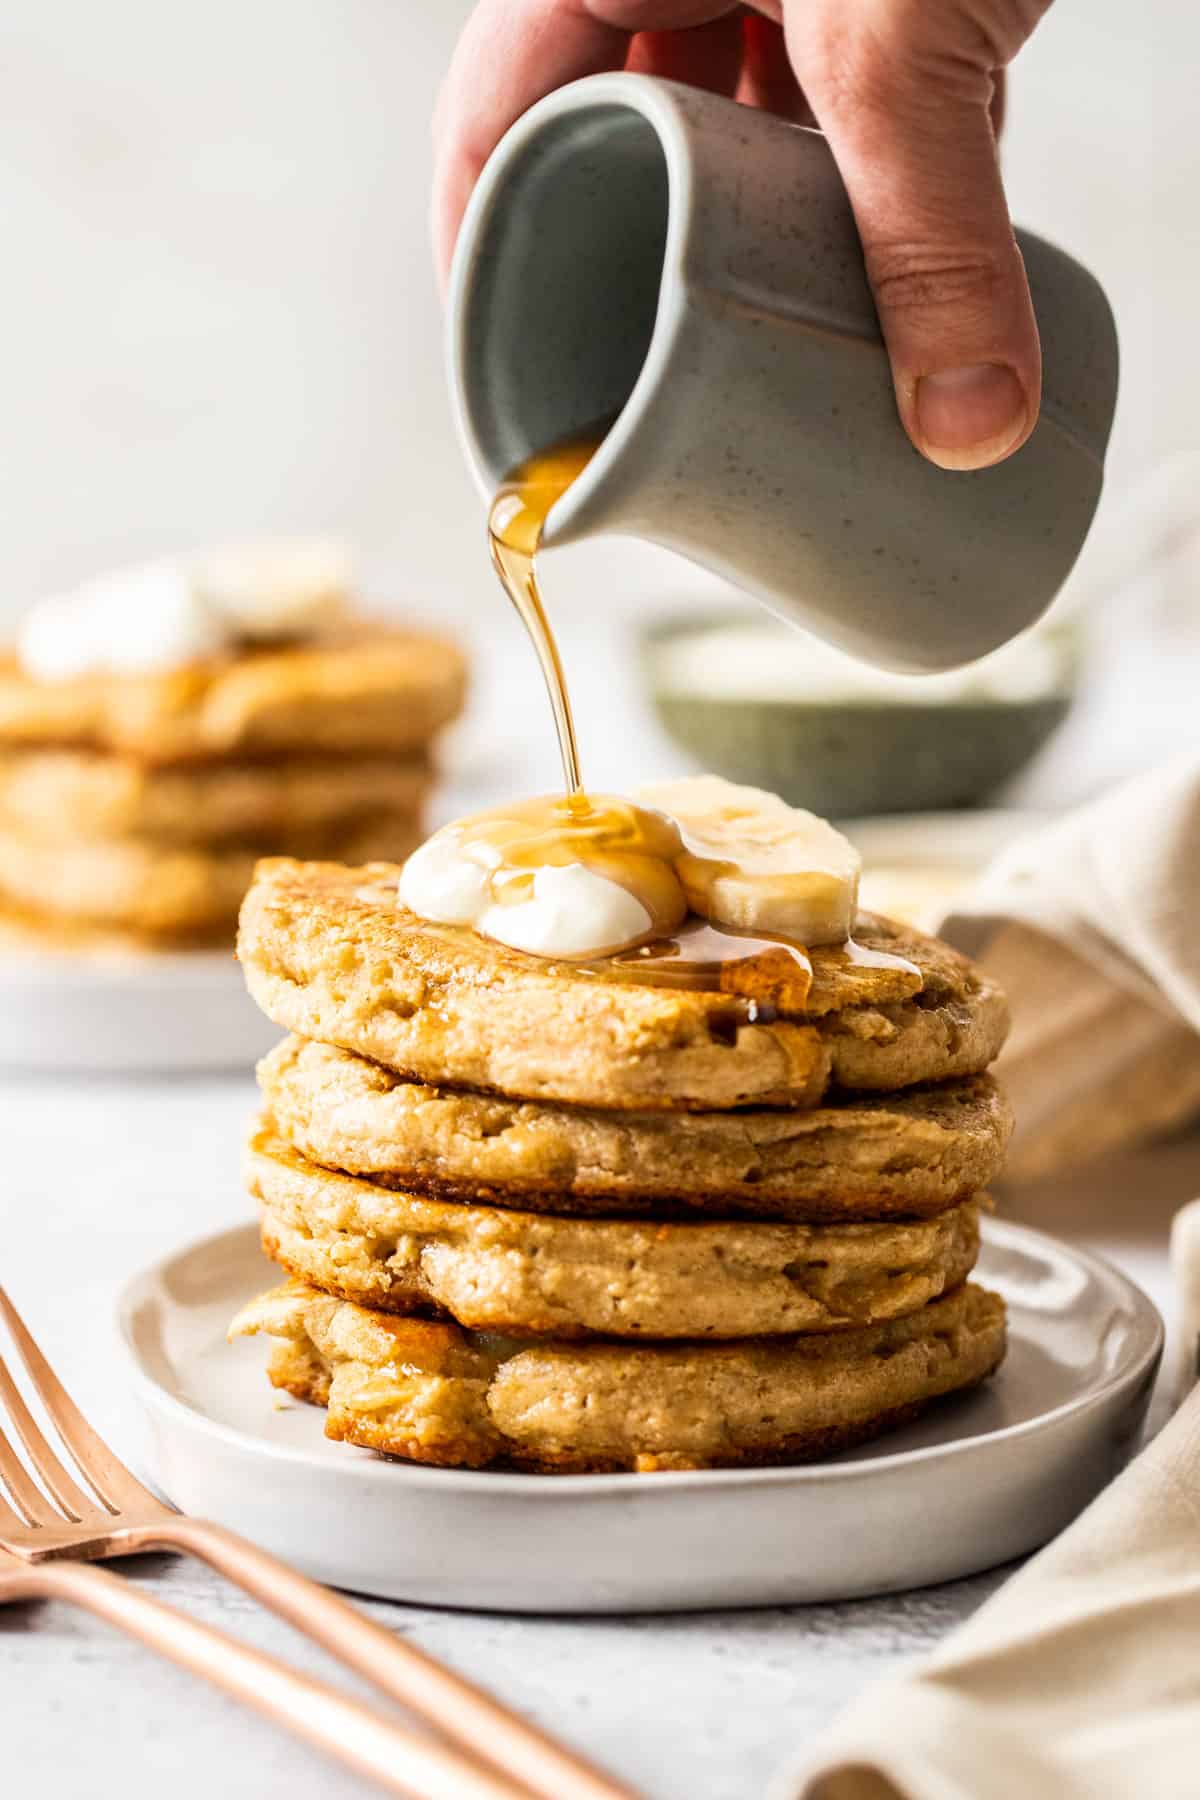 Stack of pancakes on a plate, topped with yoghurt, sliced banana and maple syrup being poured out of a jug.